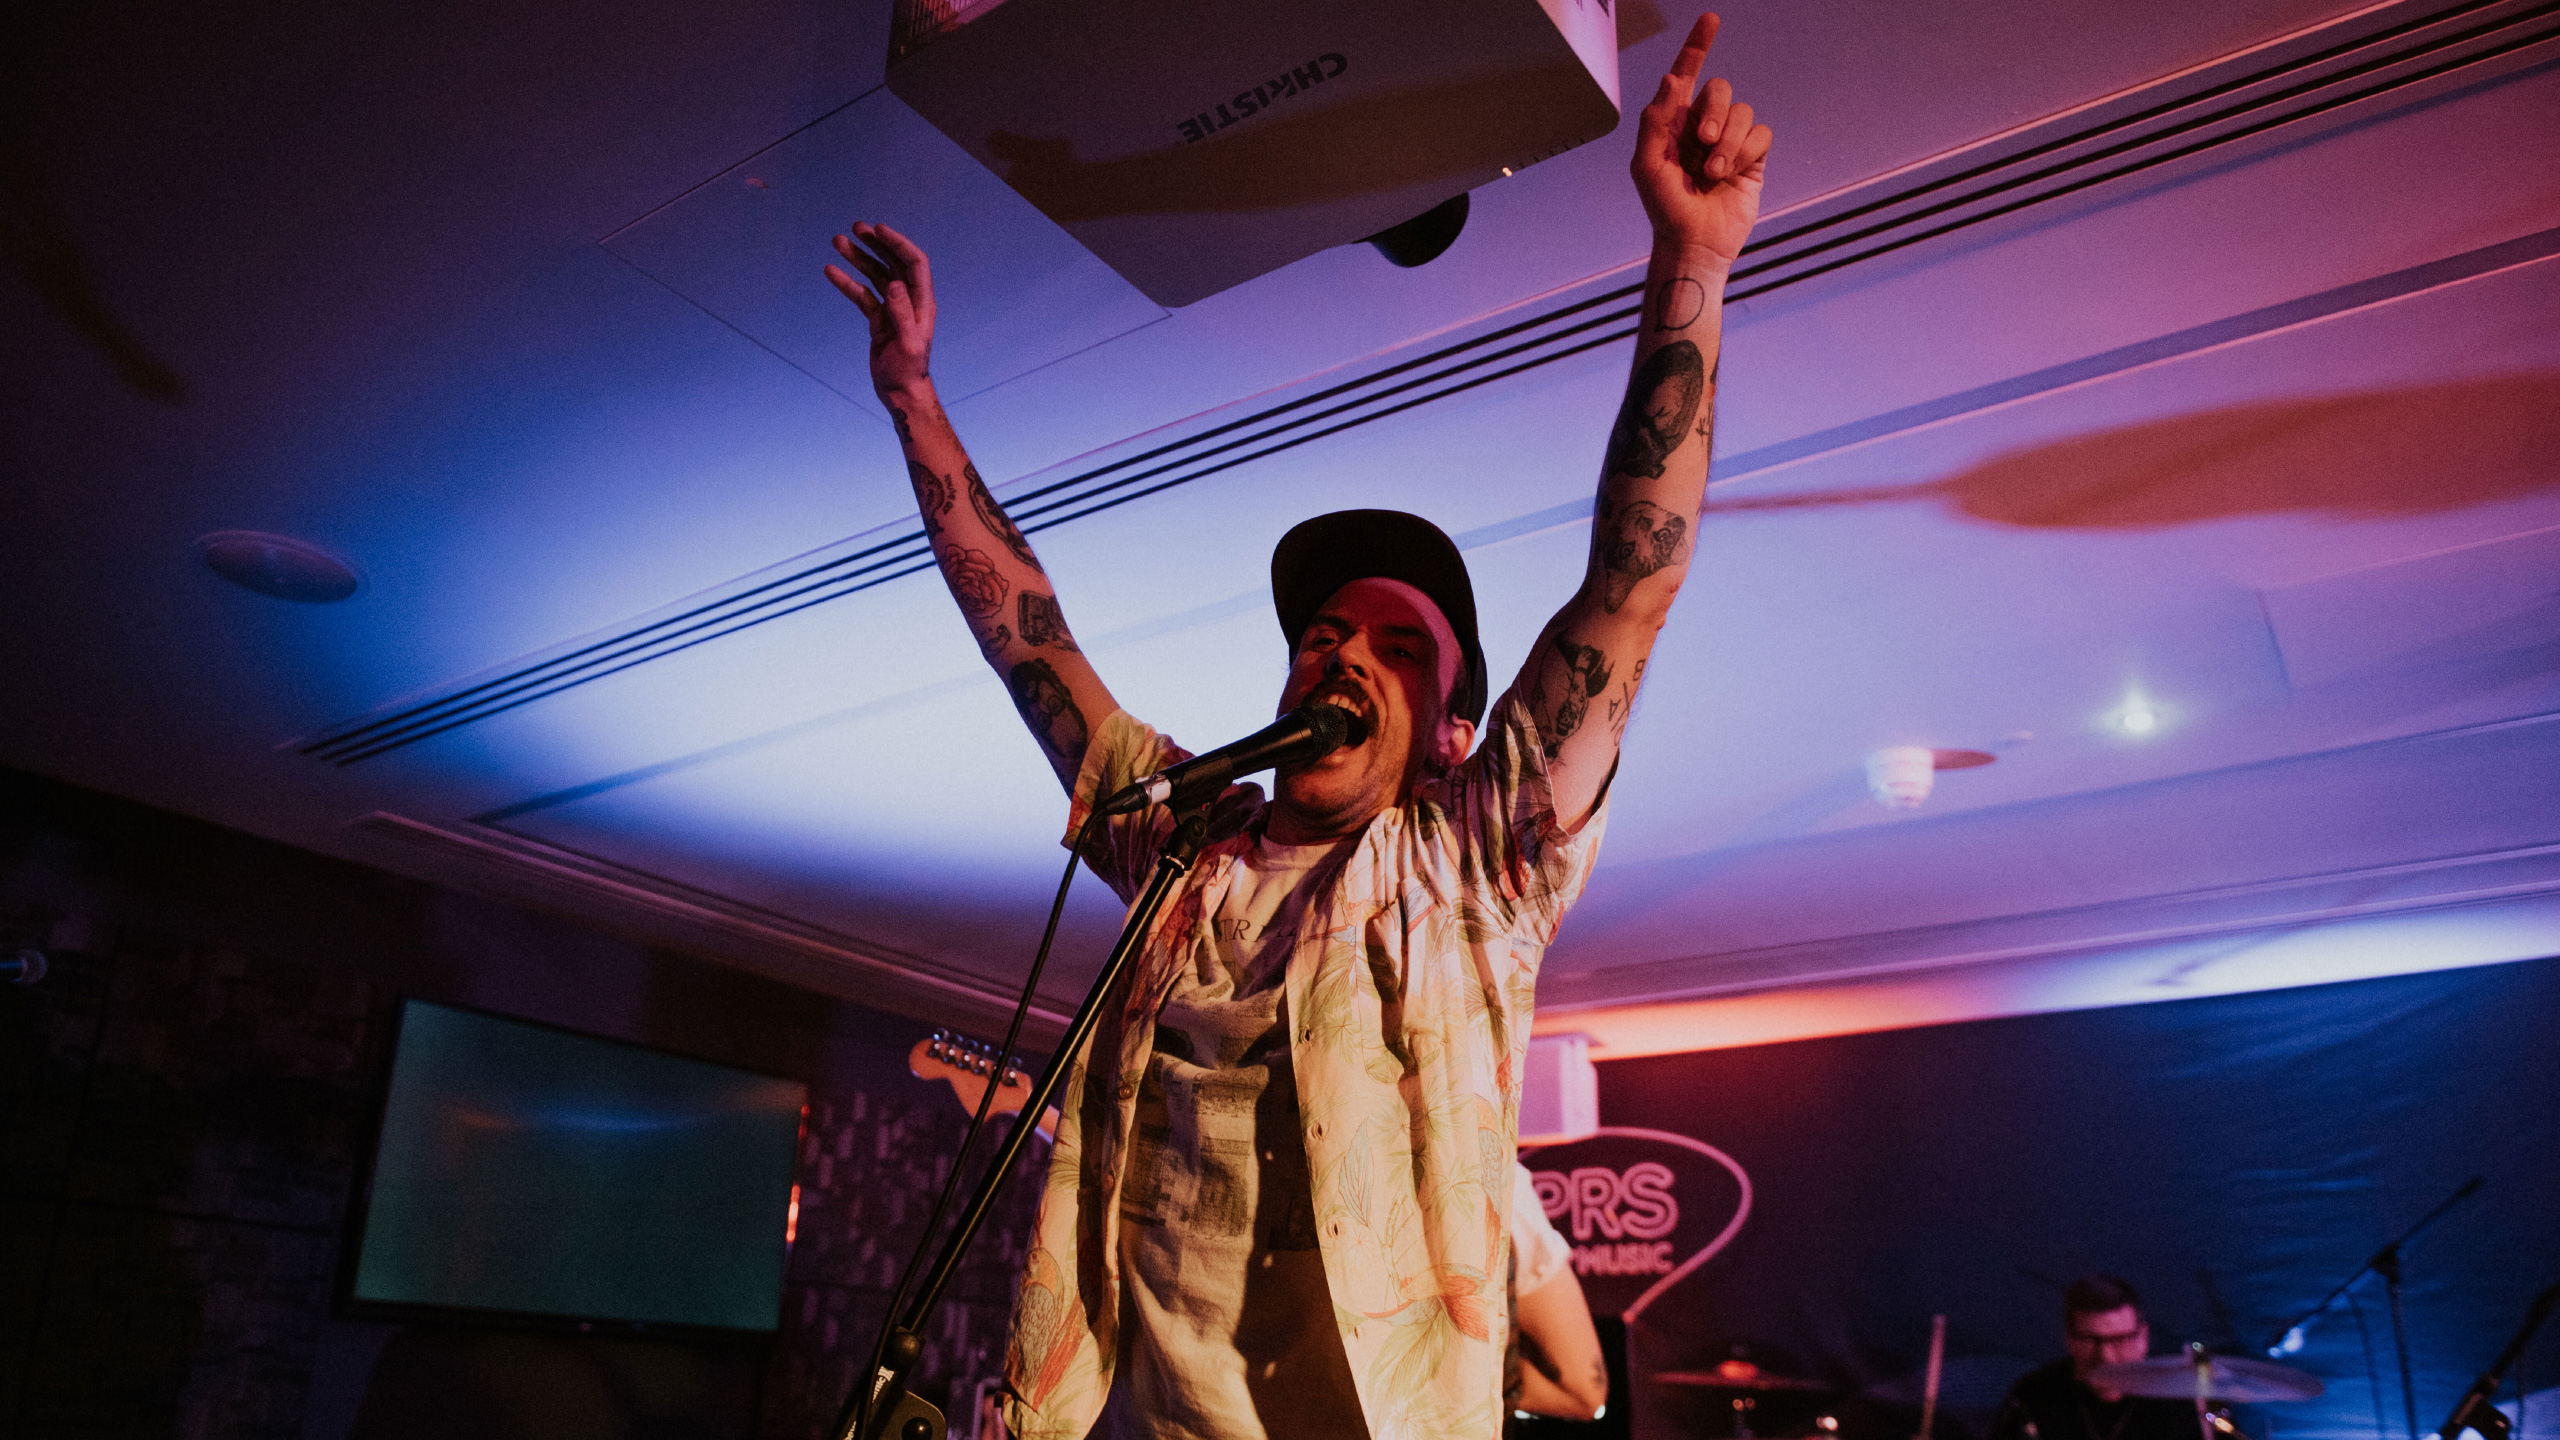 Idles frontman Joe Talbot raising his clenched fists on stage at PRS for Music Presents